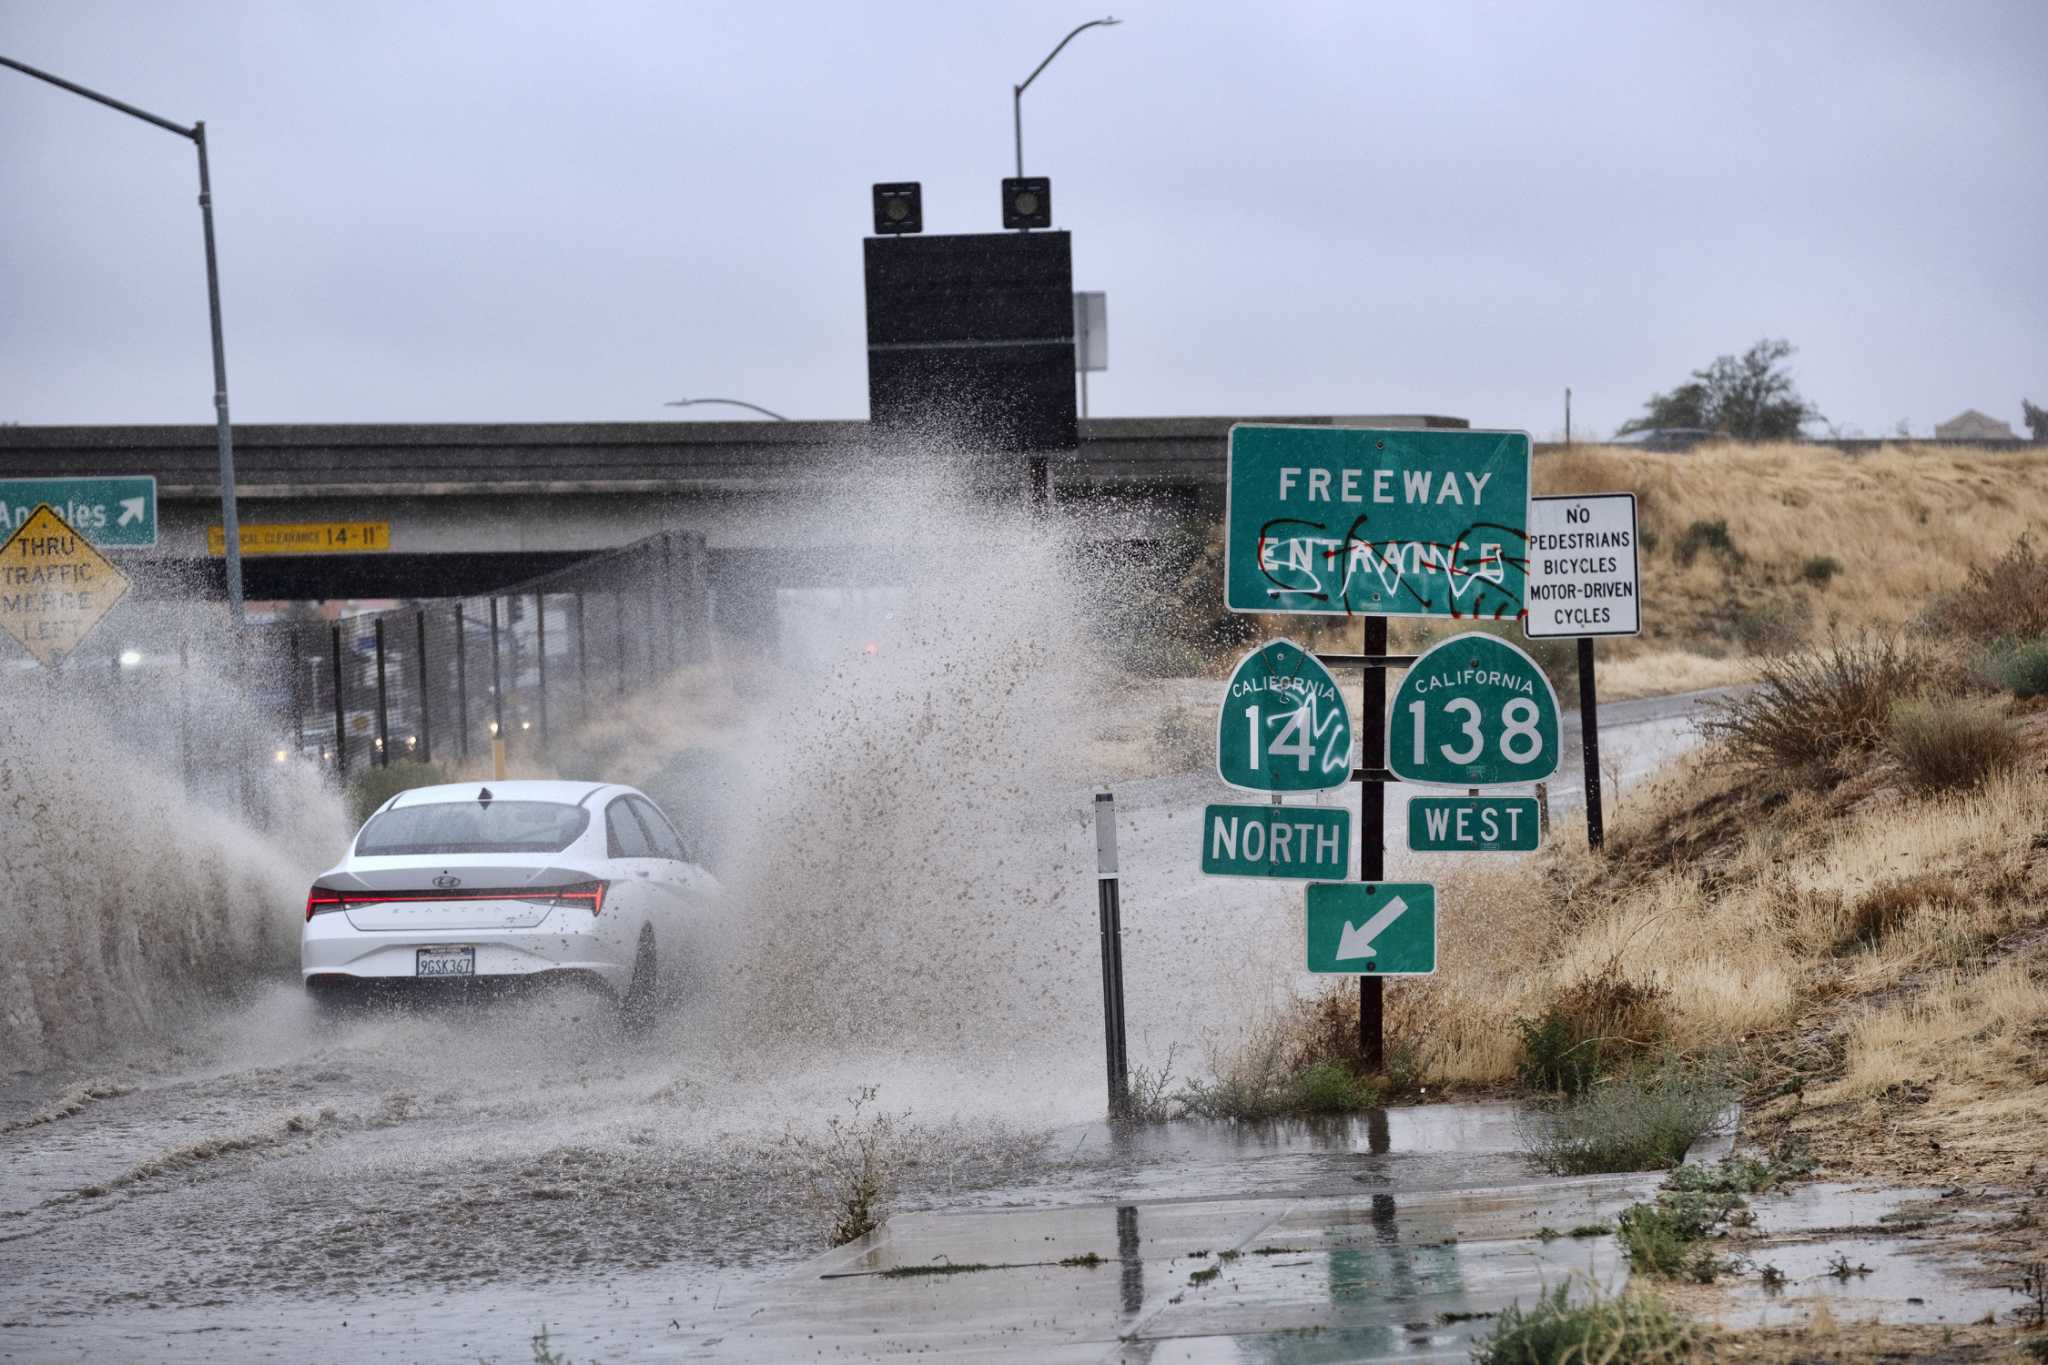 Astonishing early rainfall totals as tropical storm batters California